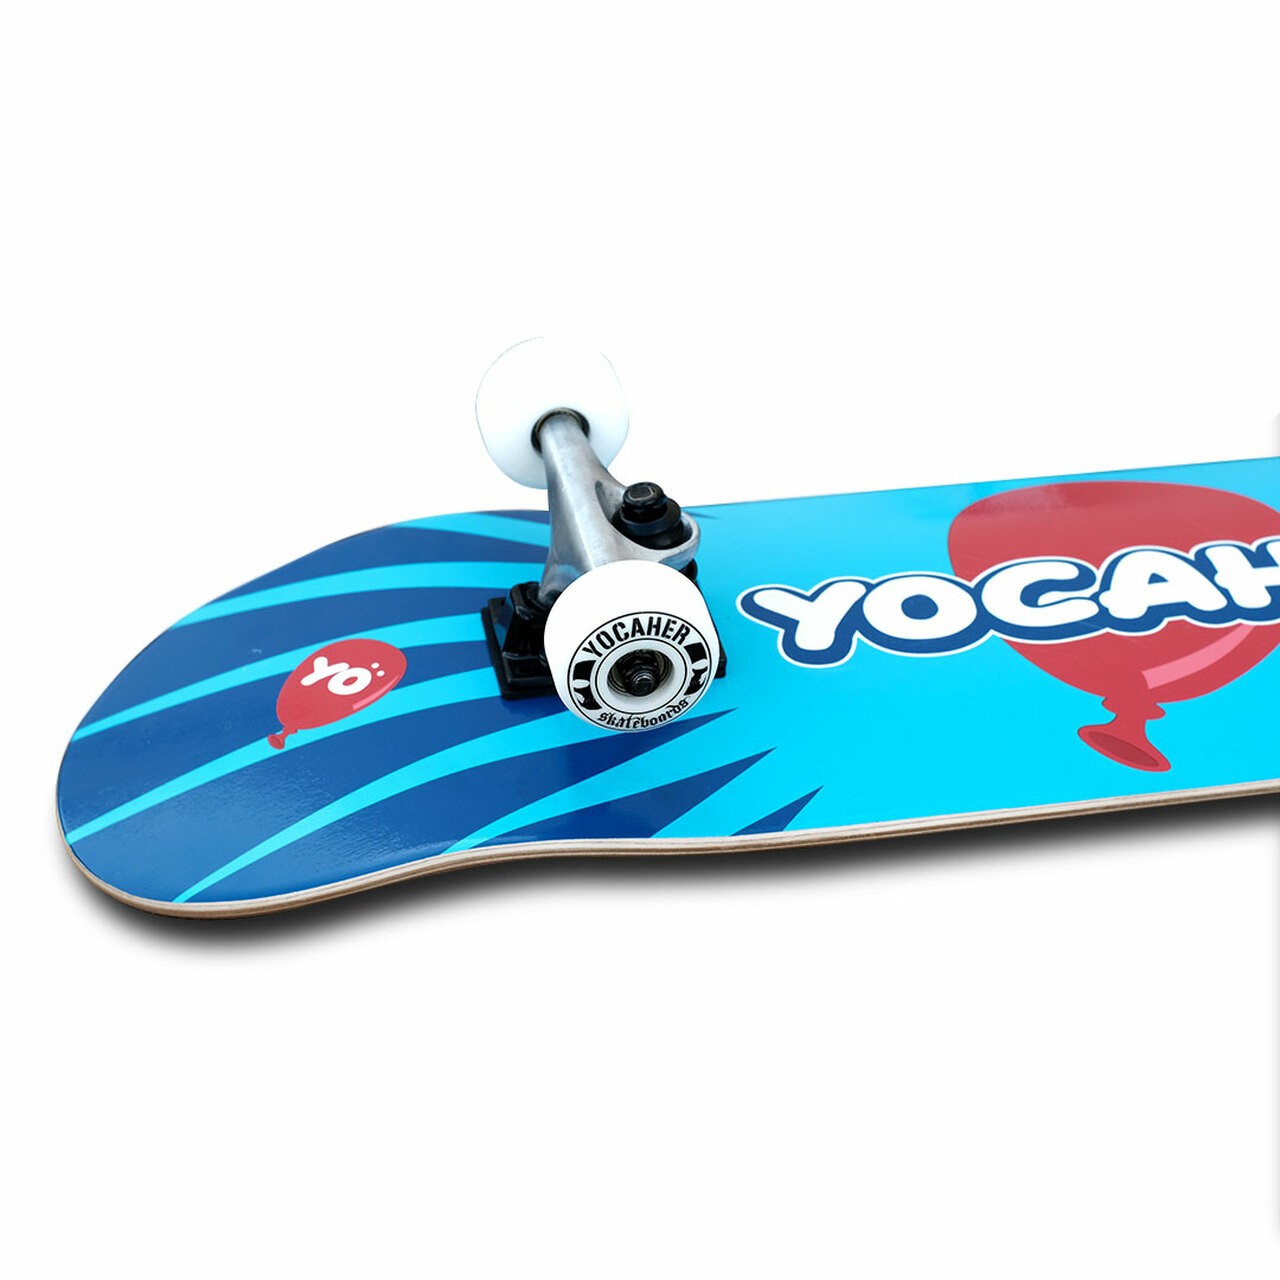 YOCAHER Pop - Skateboard Street - Planche Complete